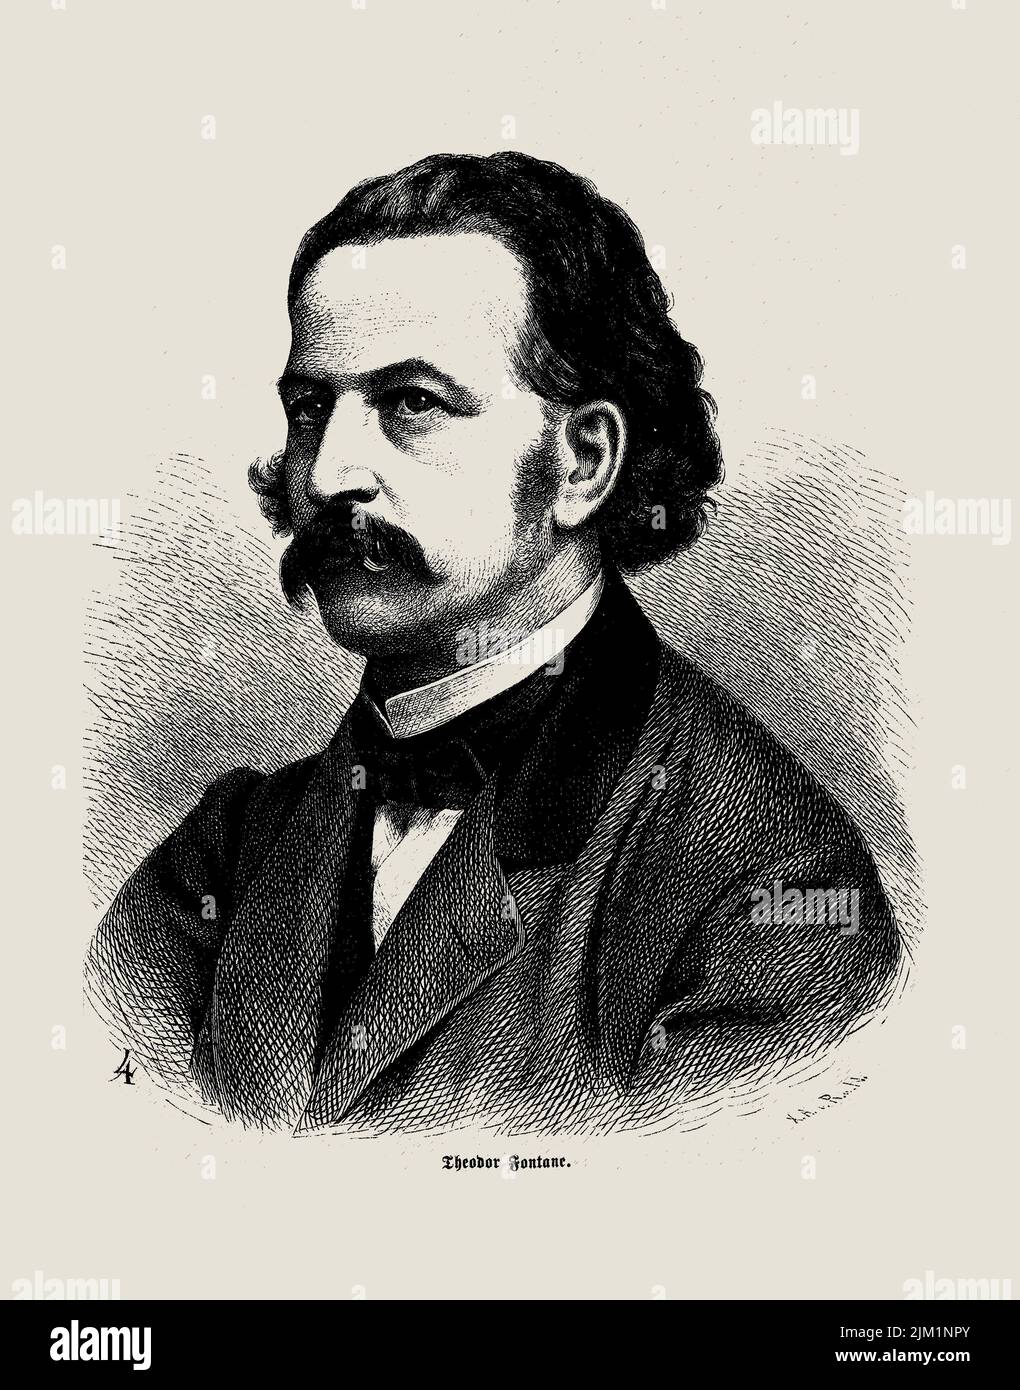 Portrait of Theodor Fontane (1819-1898). Museum: PRIVATE COLLECTION. Author: ANONYMOUS. Stock Photo